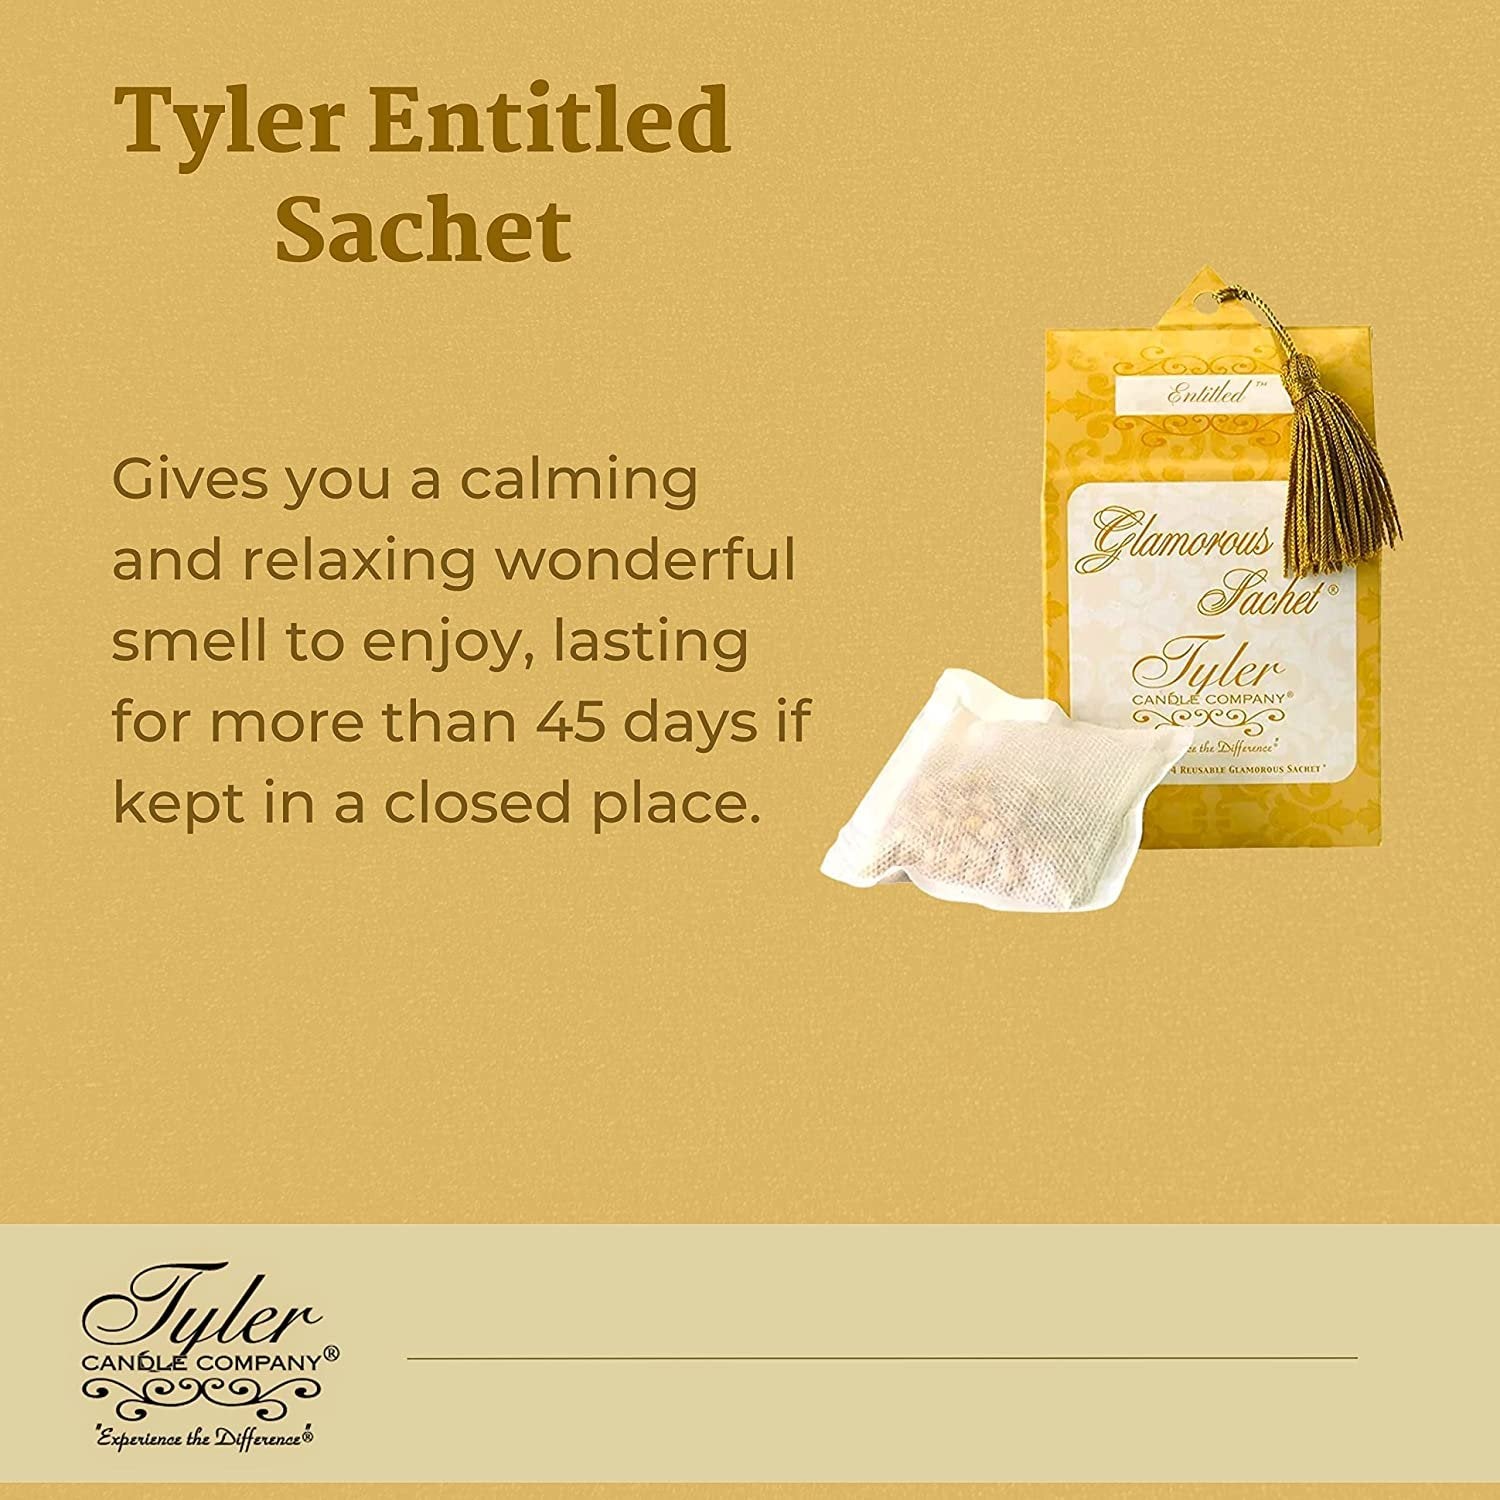 Tyler Candle Company Entitled Dryer Sheet Sachets - Glamorous Reusable Dryer Sheets - Sachets for Drawers and Closets - 2 Pack of 4 Sachets, Dryer, Home, or Personal Sachet, with Bonus Key Chain